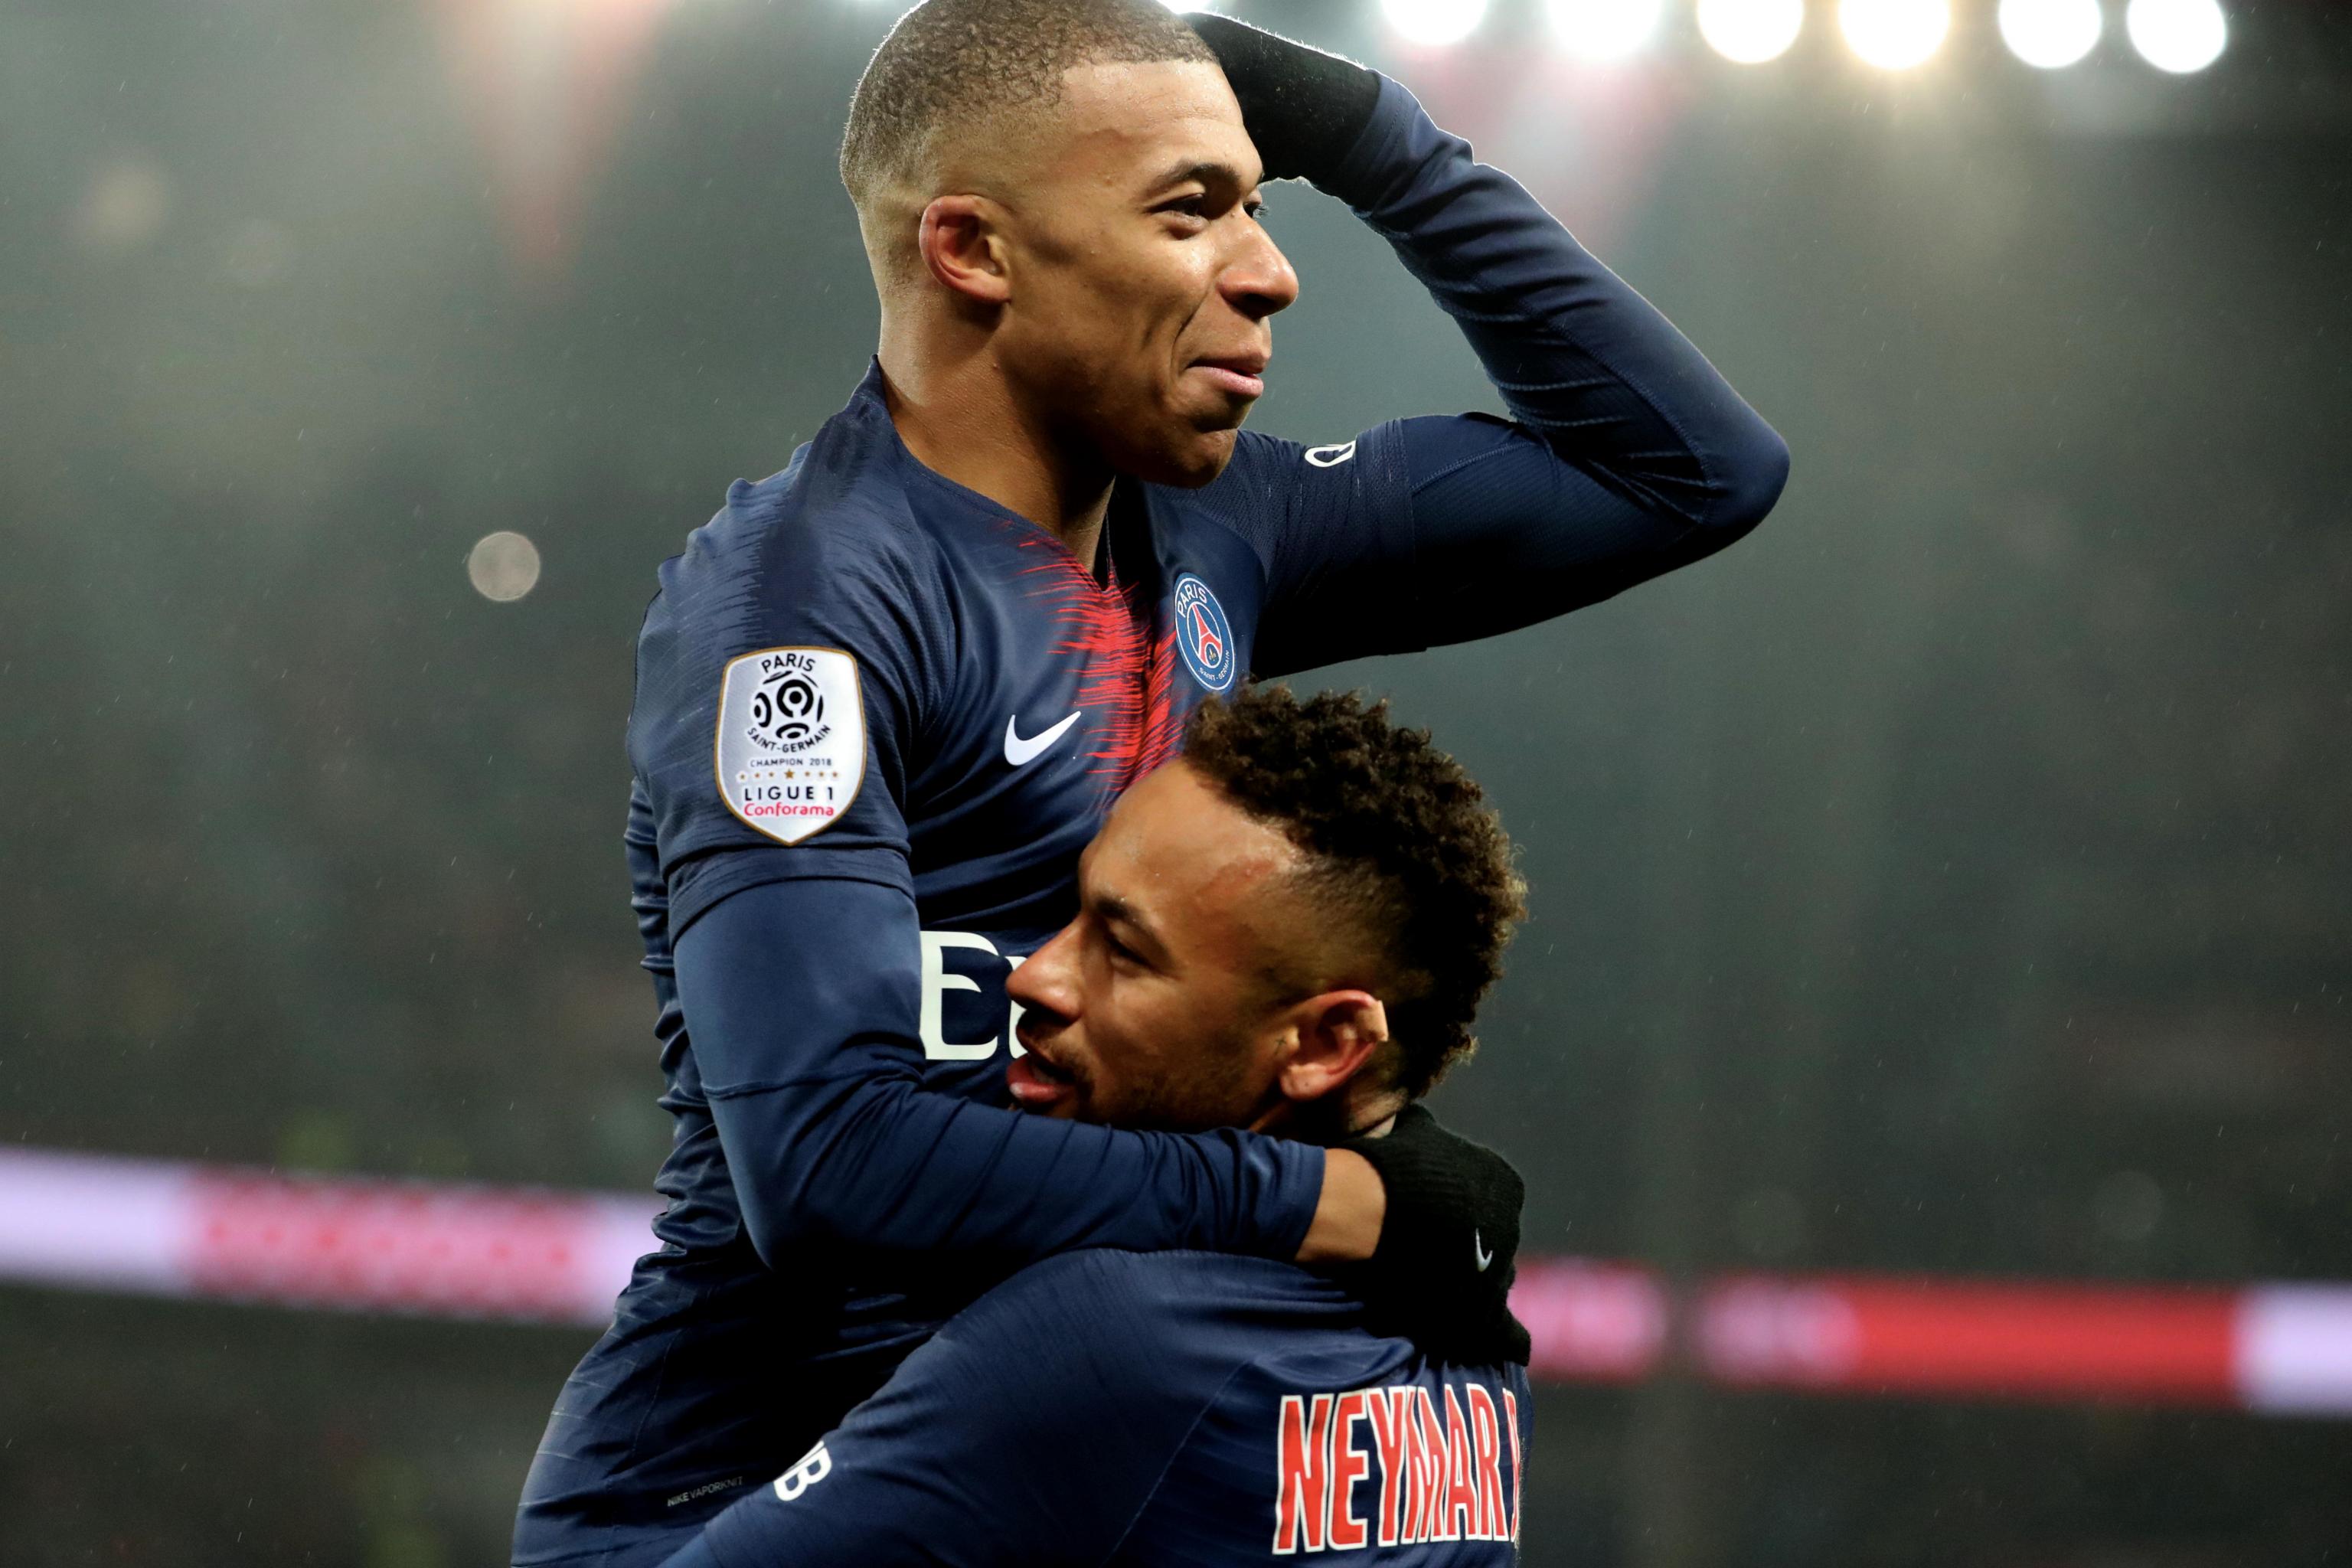 Neymar Compares Relationship with Kylian Mbappe to Lionel Messi Partnership | Bleacher Report | Latest News, Videos and Highlights